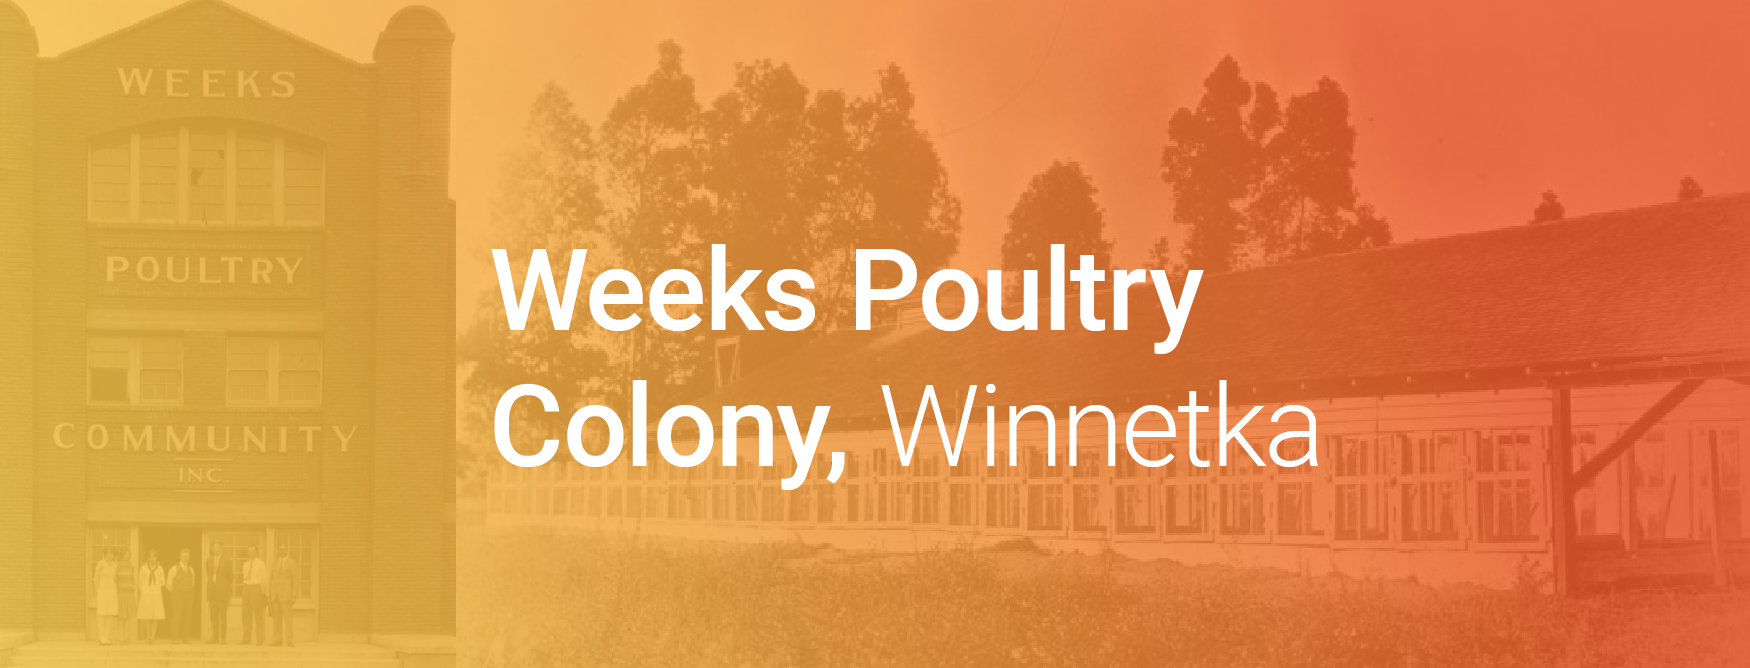 Weeks Poultry Colony